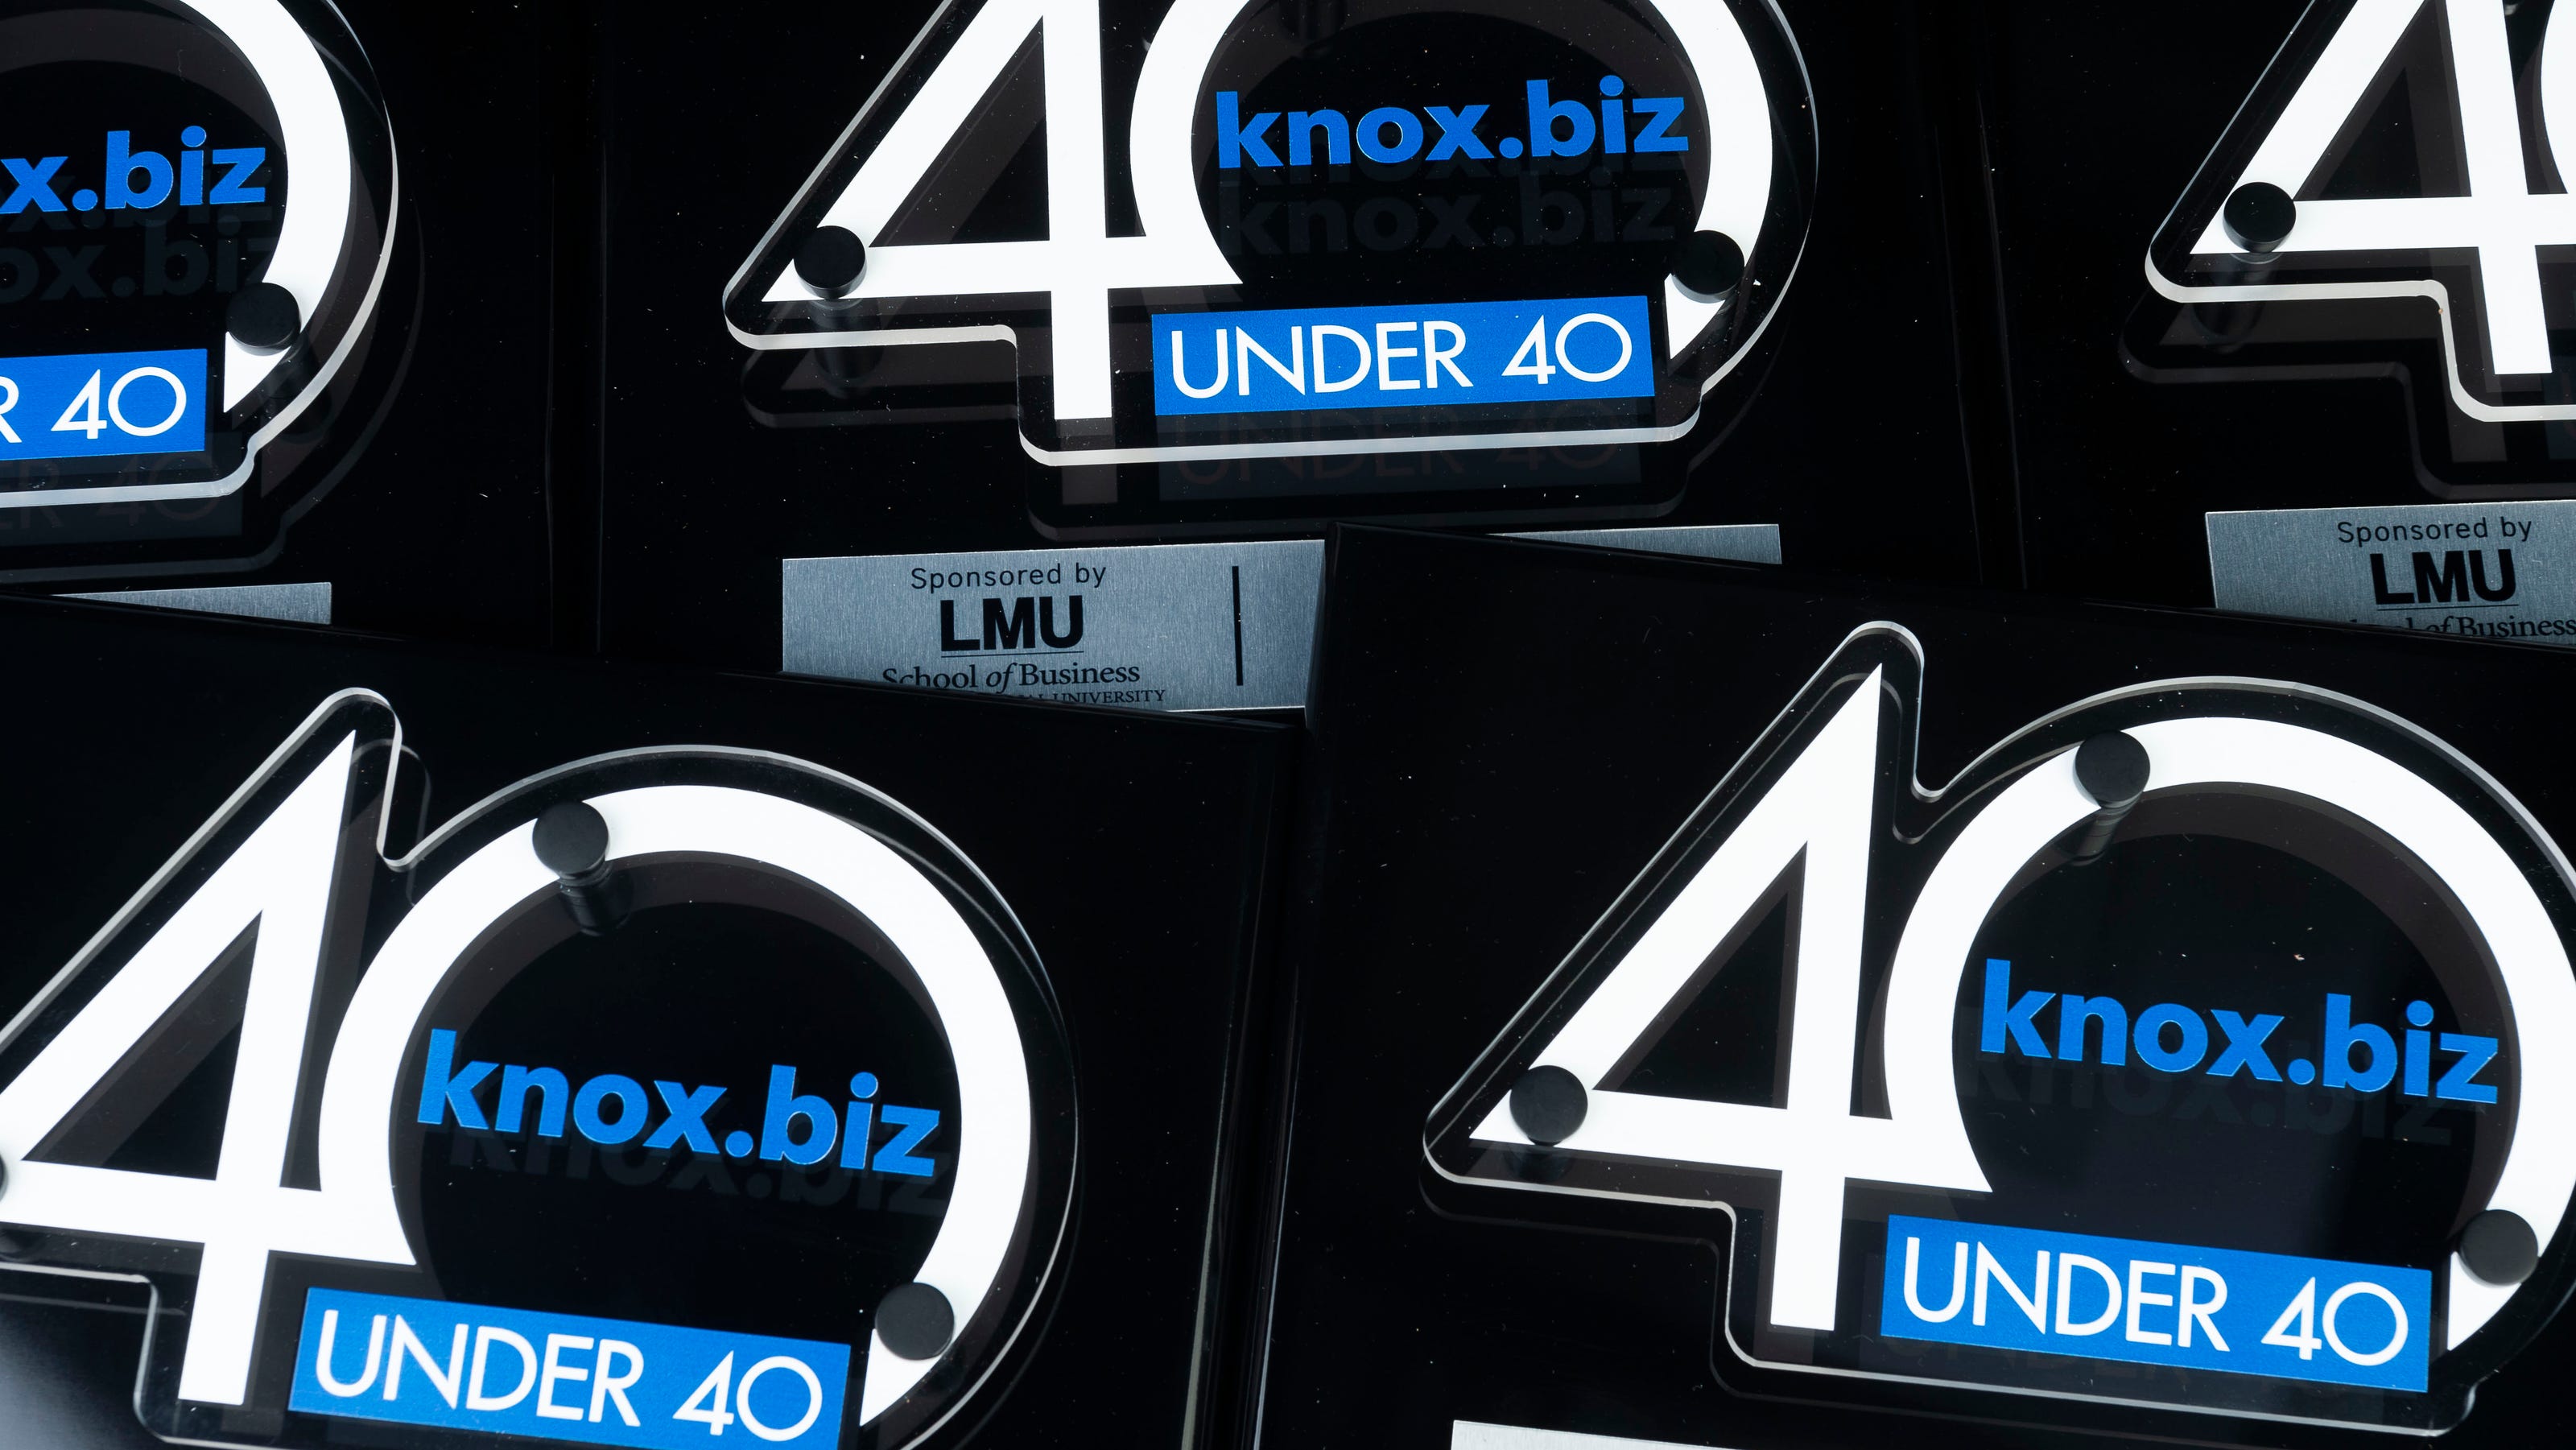 Knox News 40 Under 40 awards honor young professionals in Knoxville